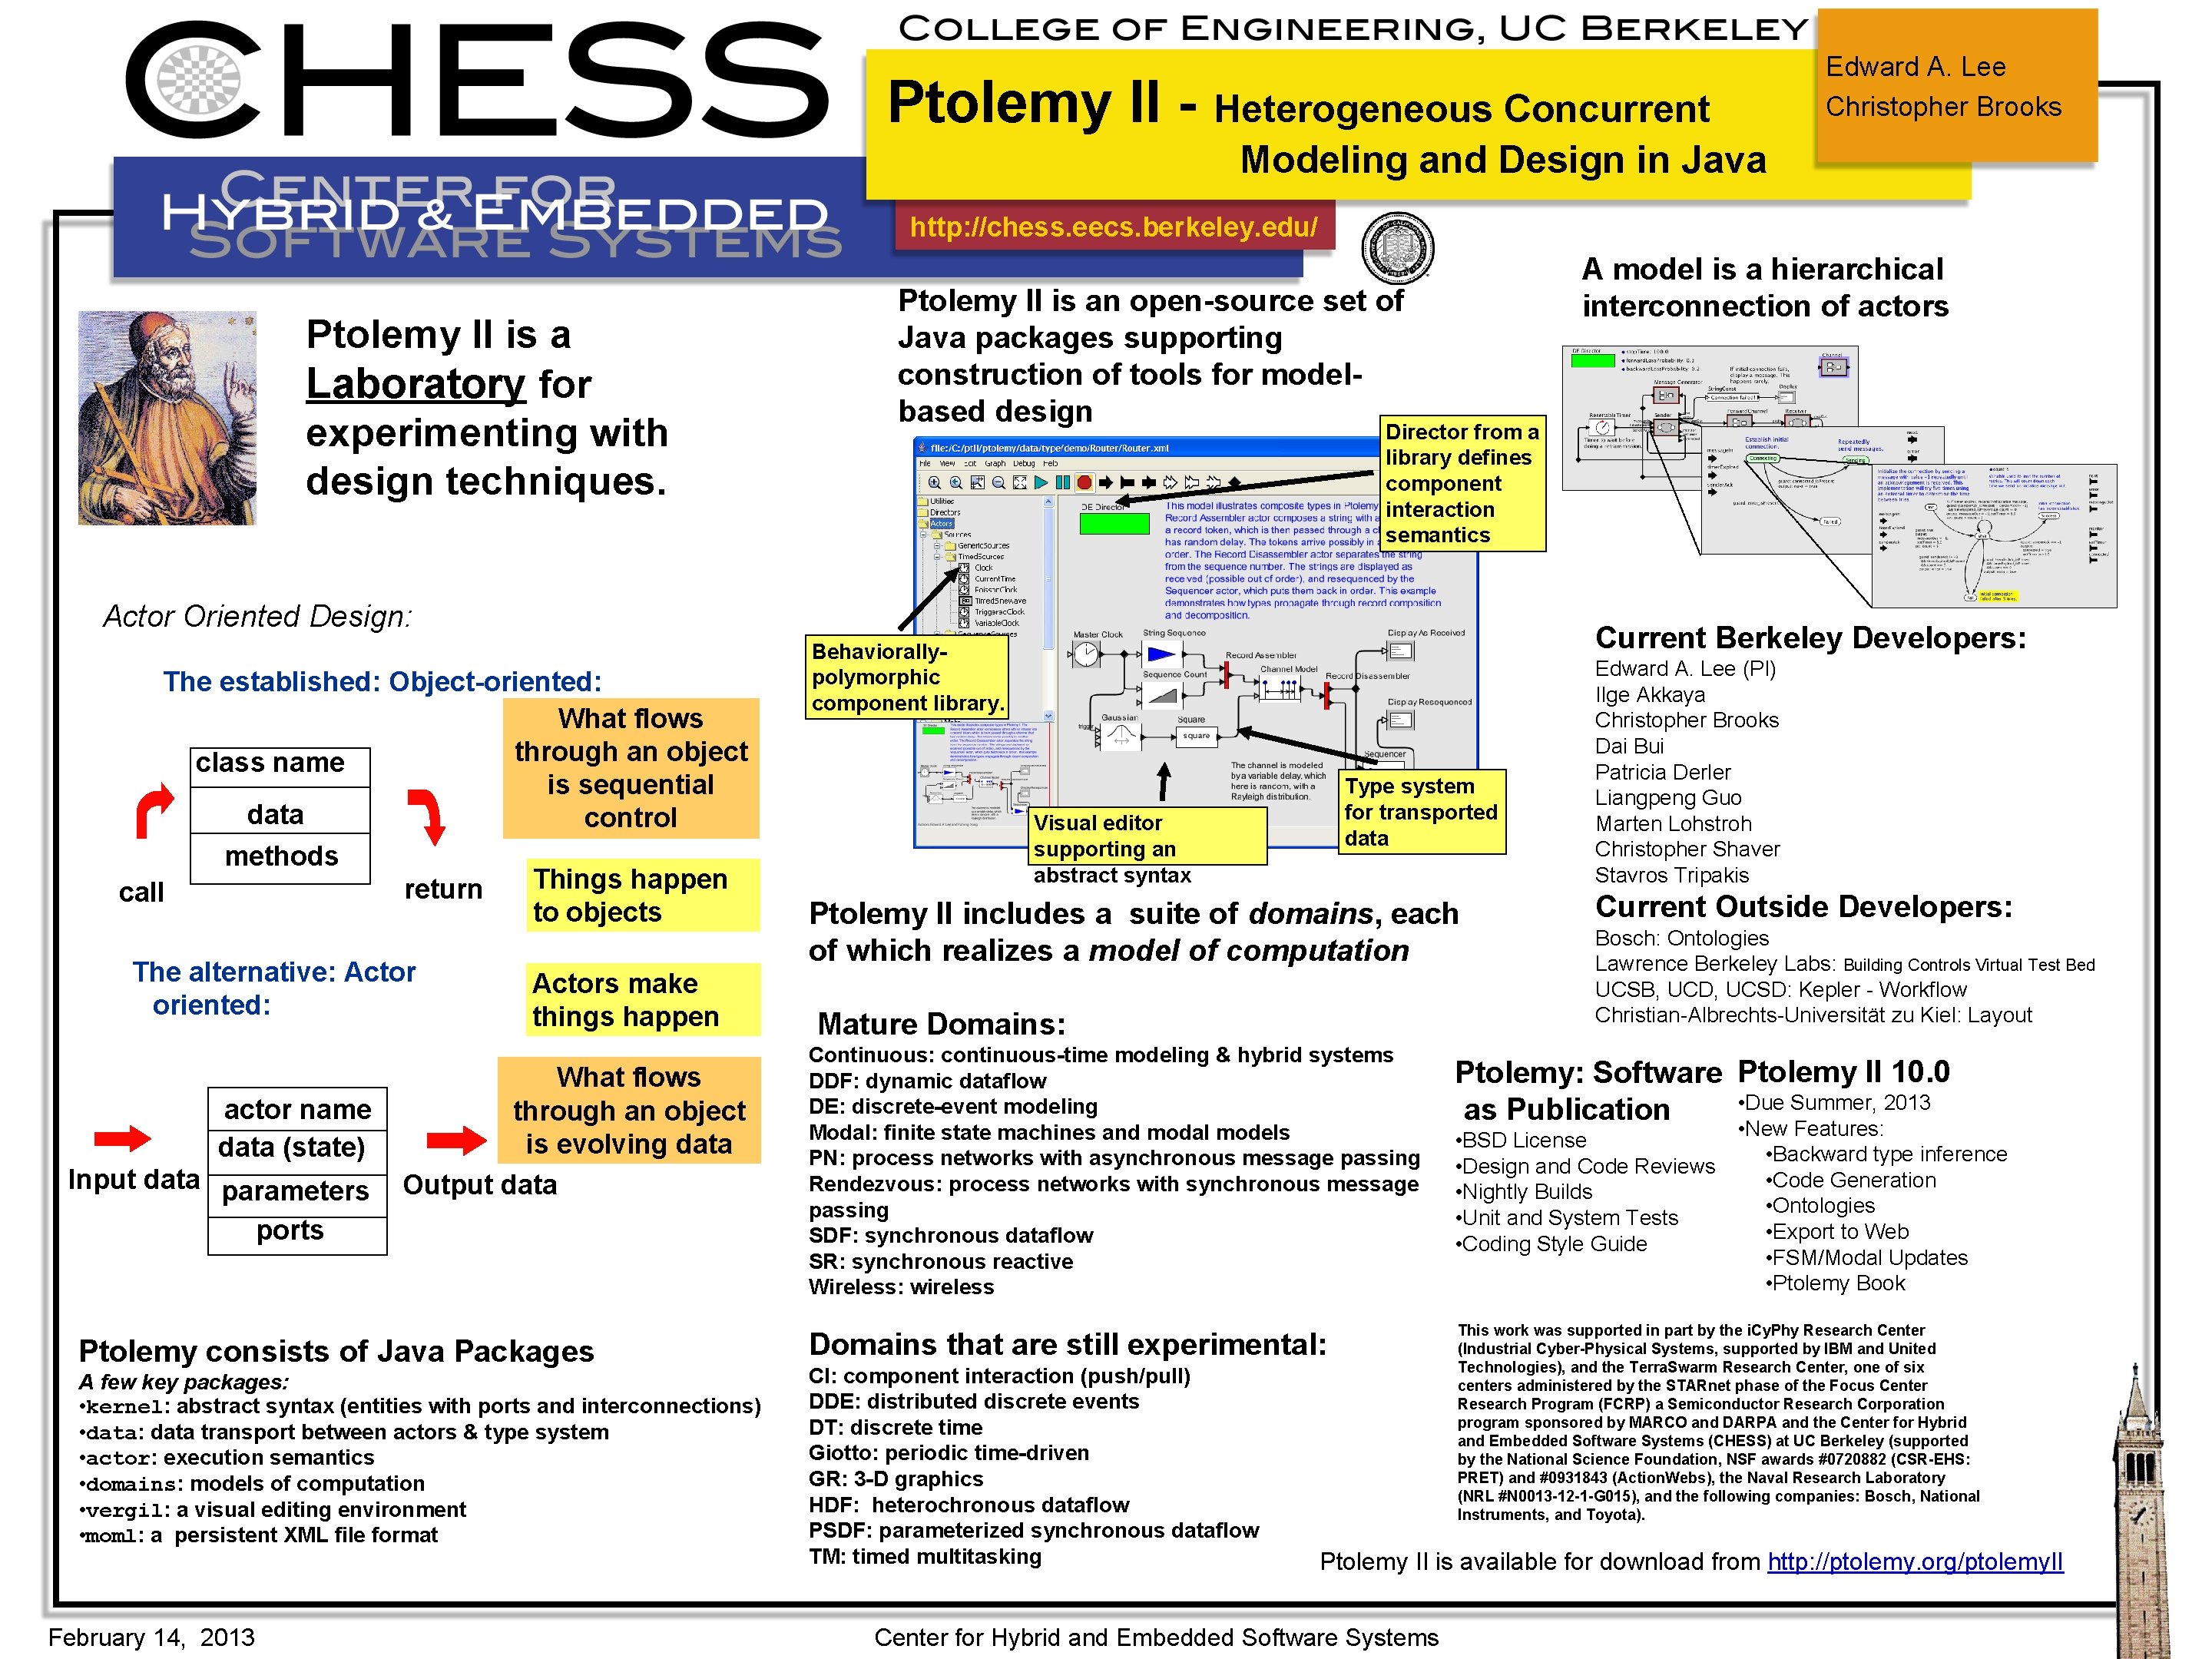 Ptolemy II - Heterogeneous Concurrent Edward A. Lee Christopher Brooks Modeling and Design in